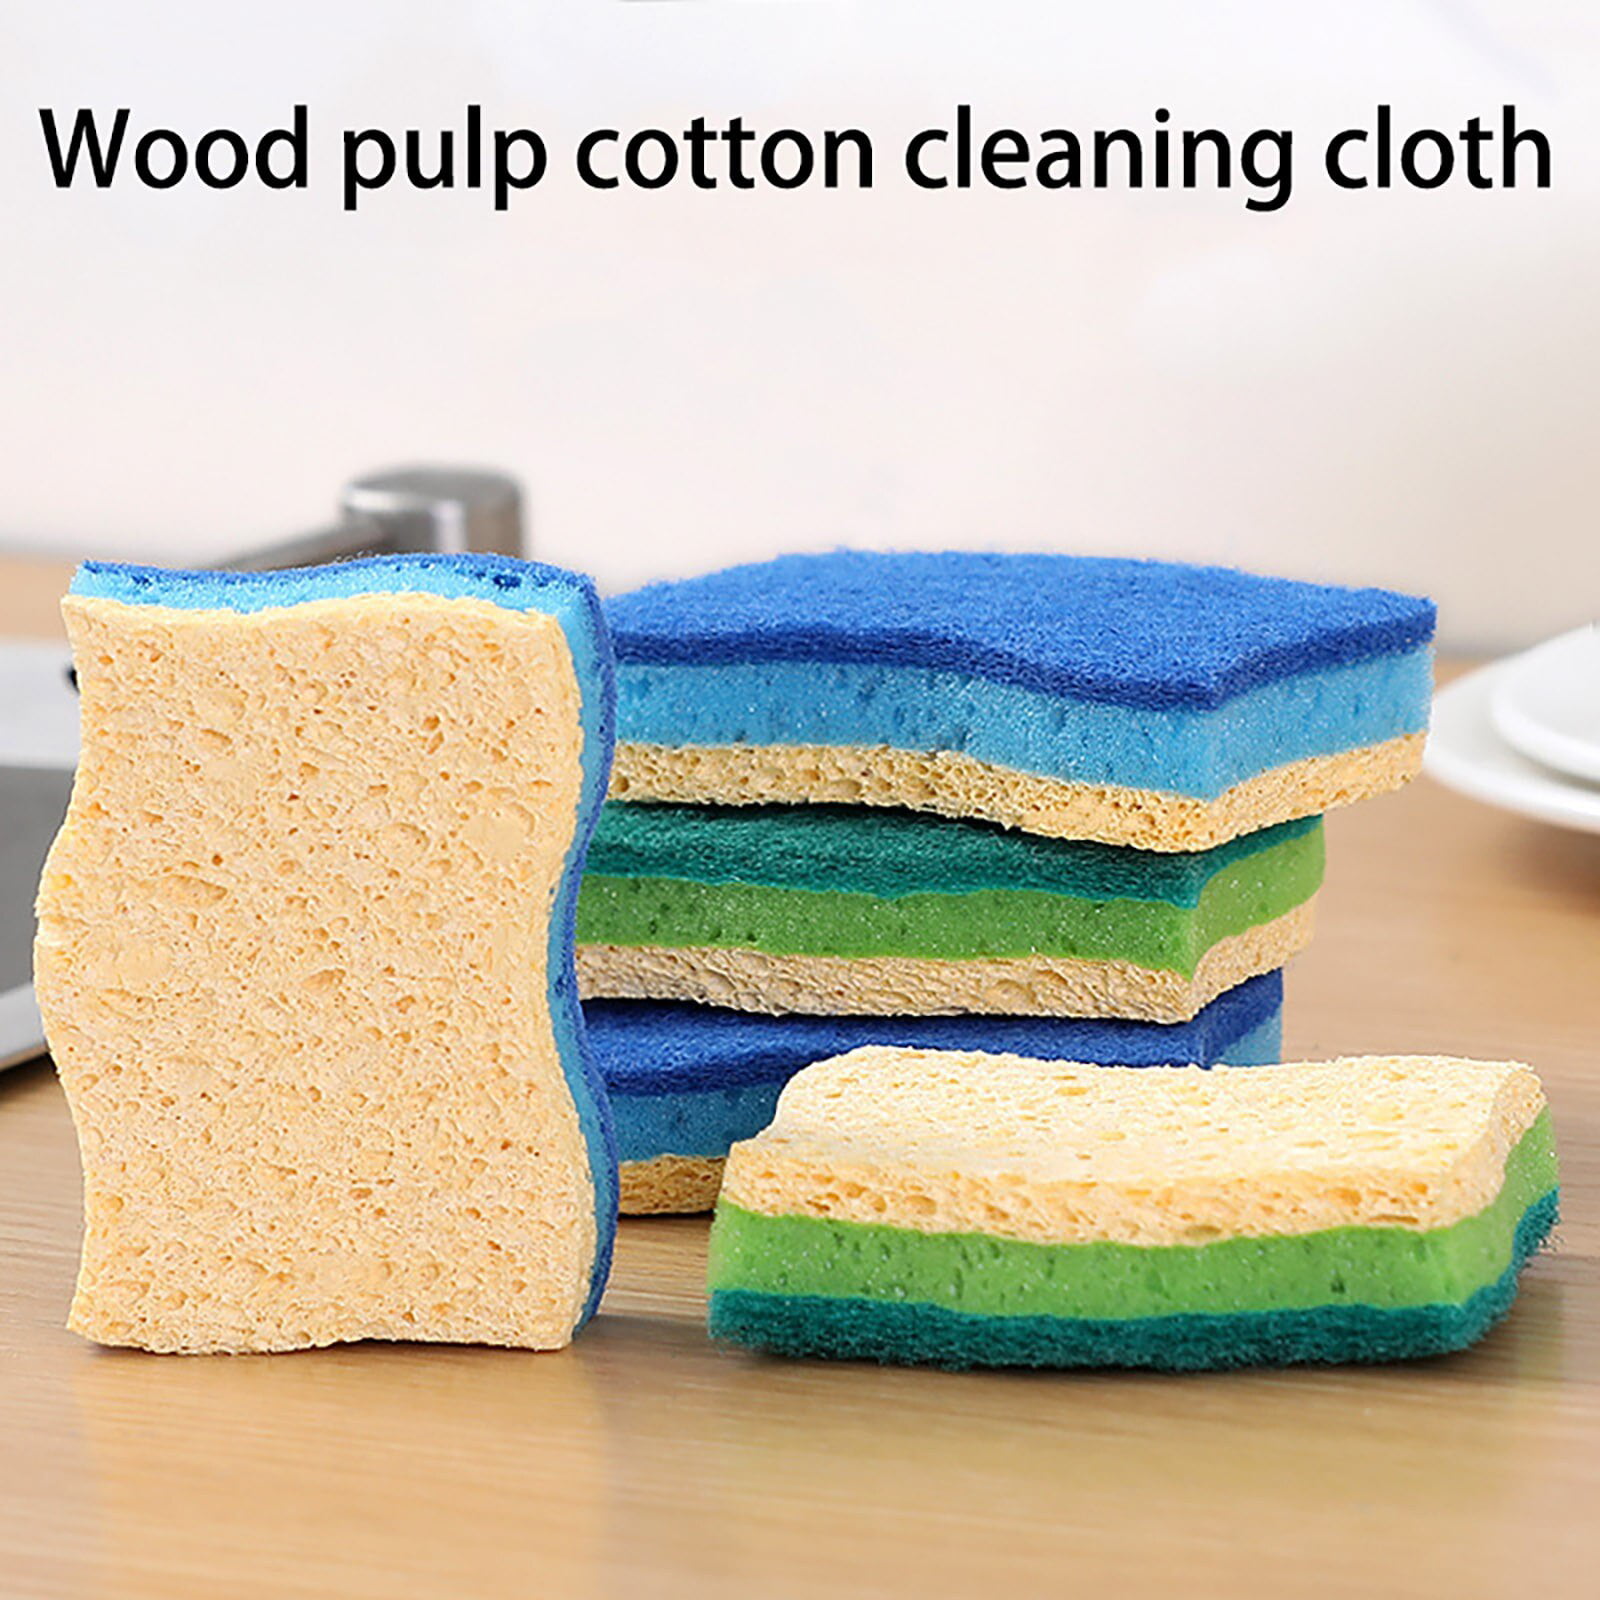 Jophufed Cleaning Supplies Christmas Clearance deals Dishwashing Kitchen  Sponges Natural Wood Pulp Cotton Sponge Double-side Oil Free on Clearance